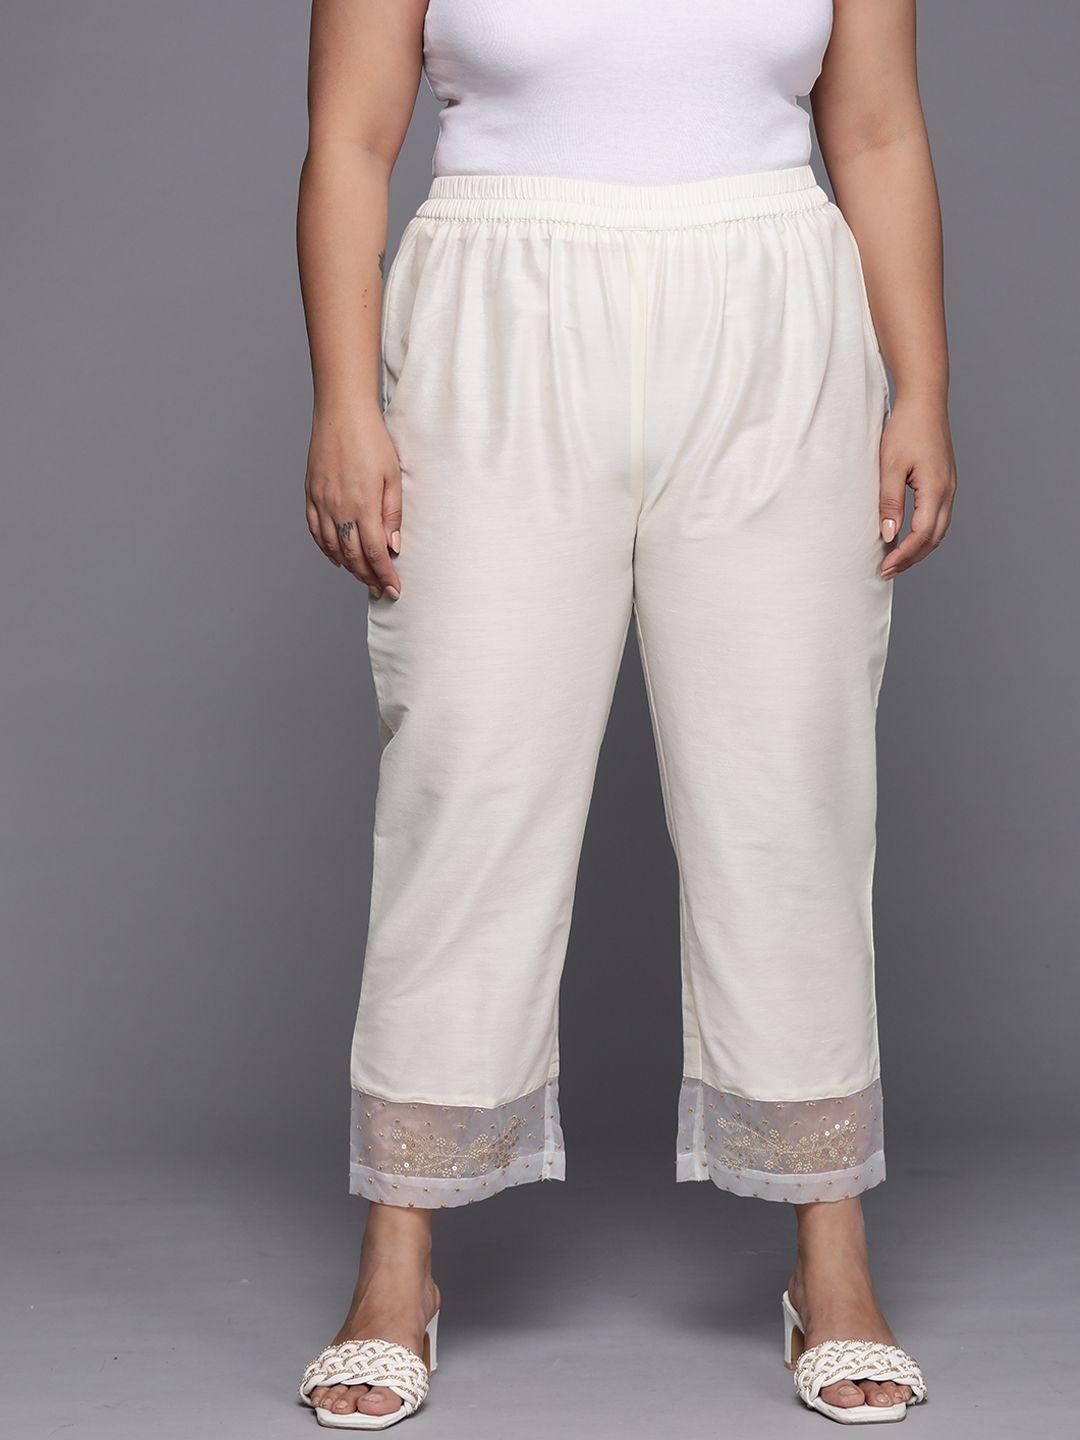 varanga-women-plus-size-off-white-floral-embroidered-cropped-trousers